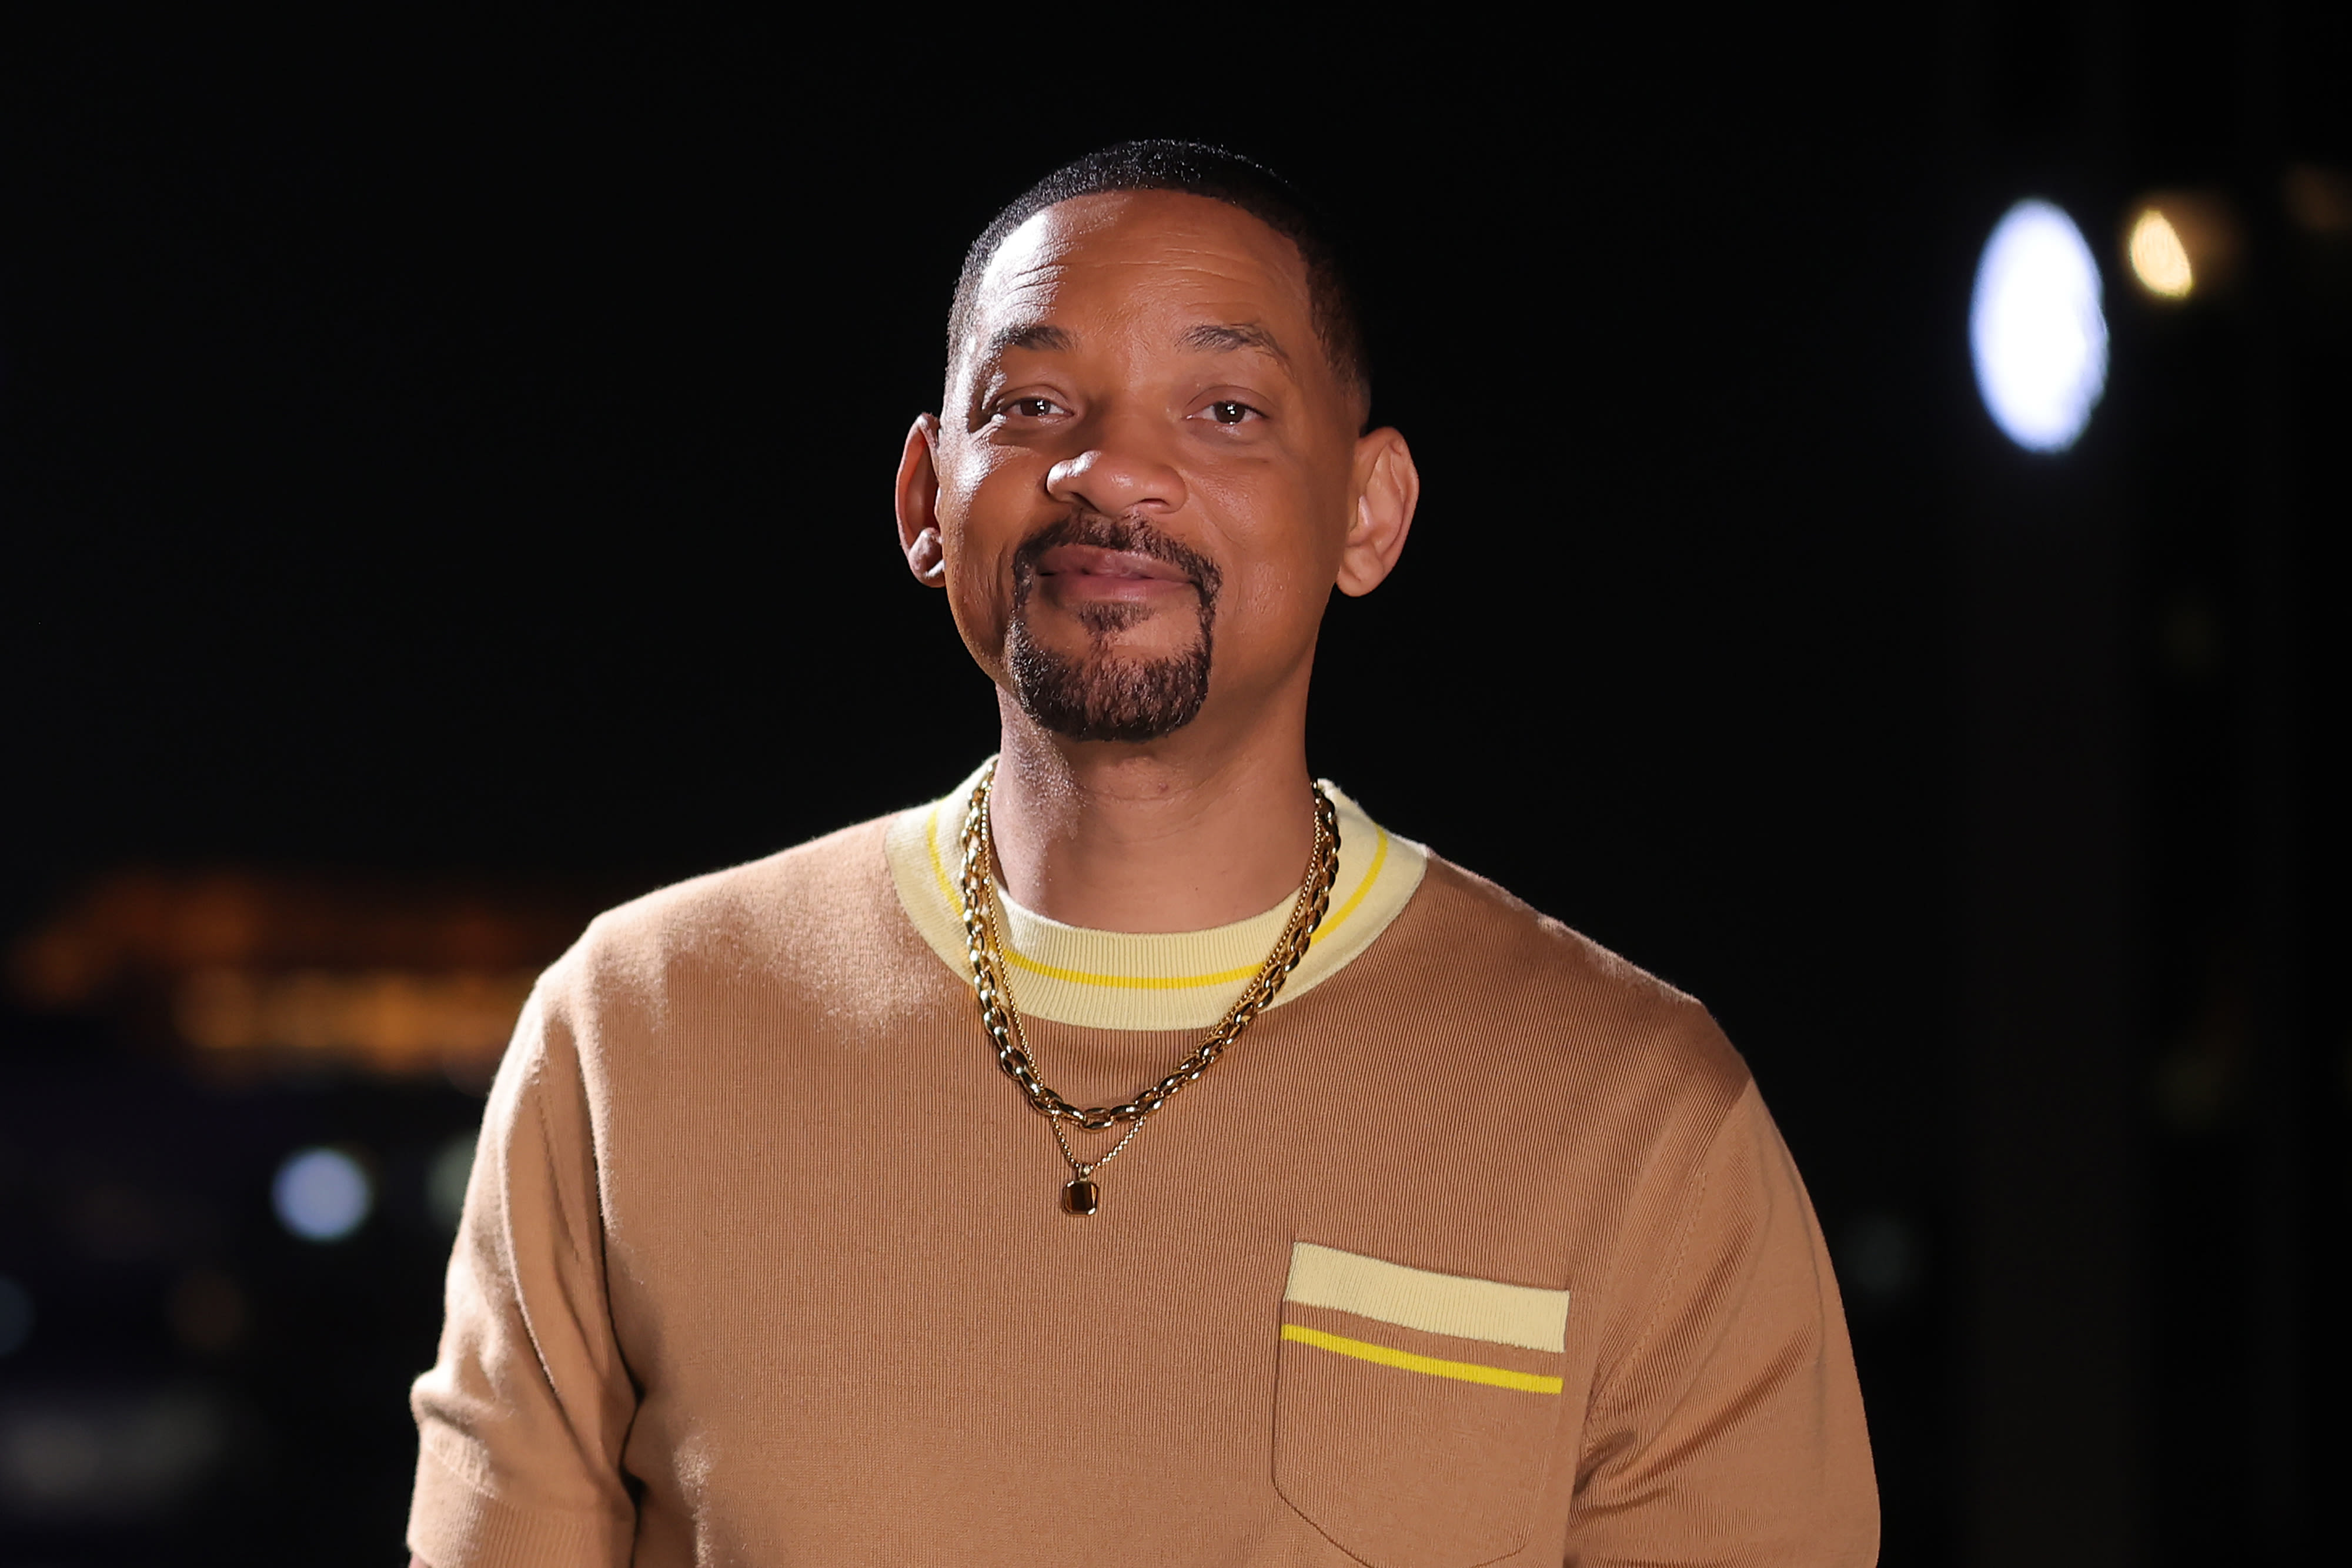 Has Will Smith’s career recovered from the infamous Oscars slap?